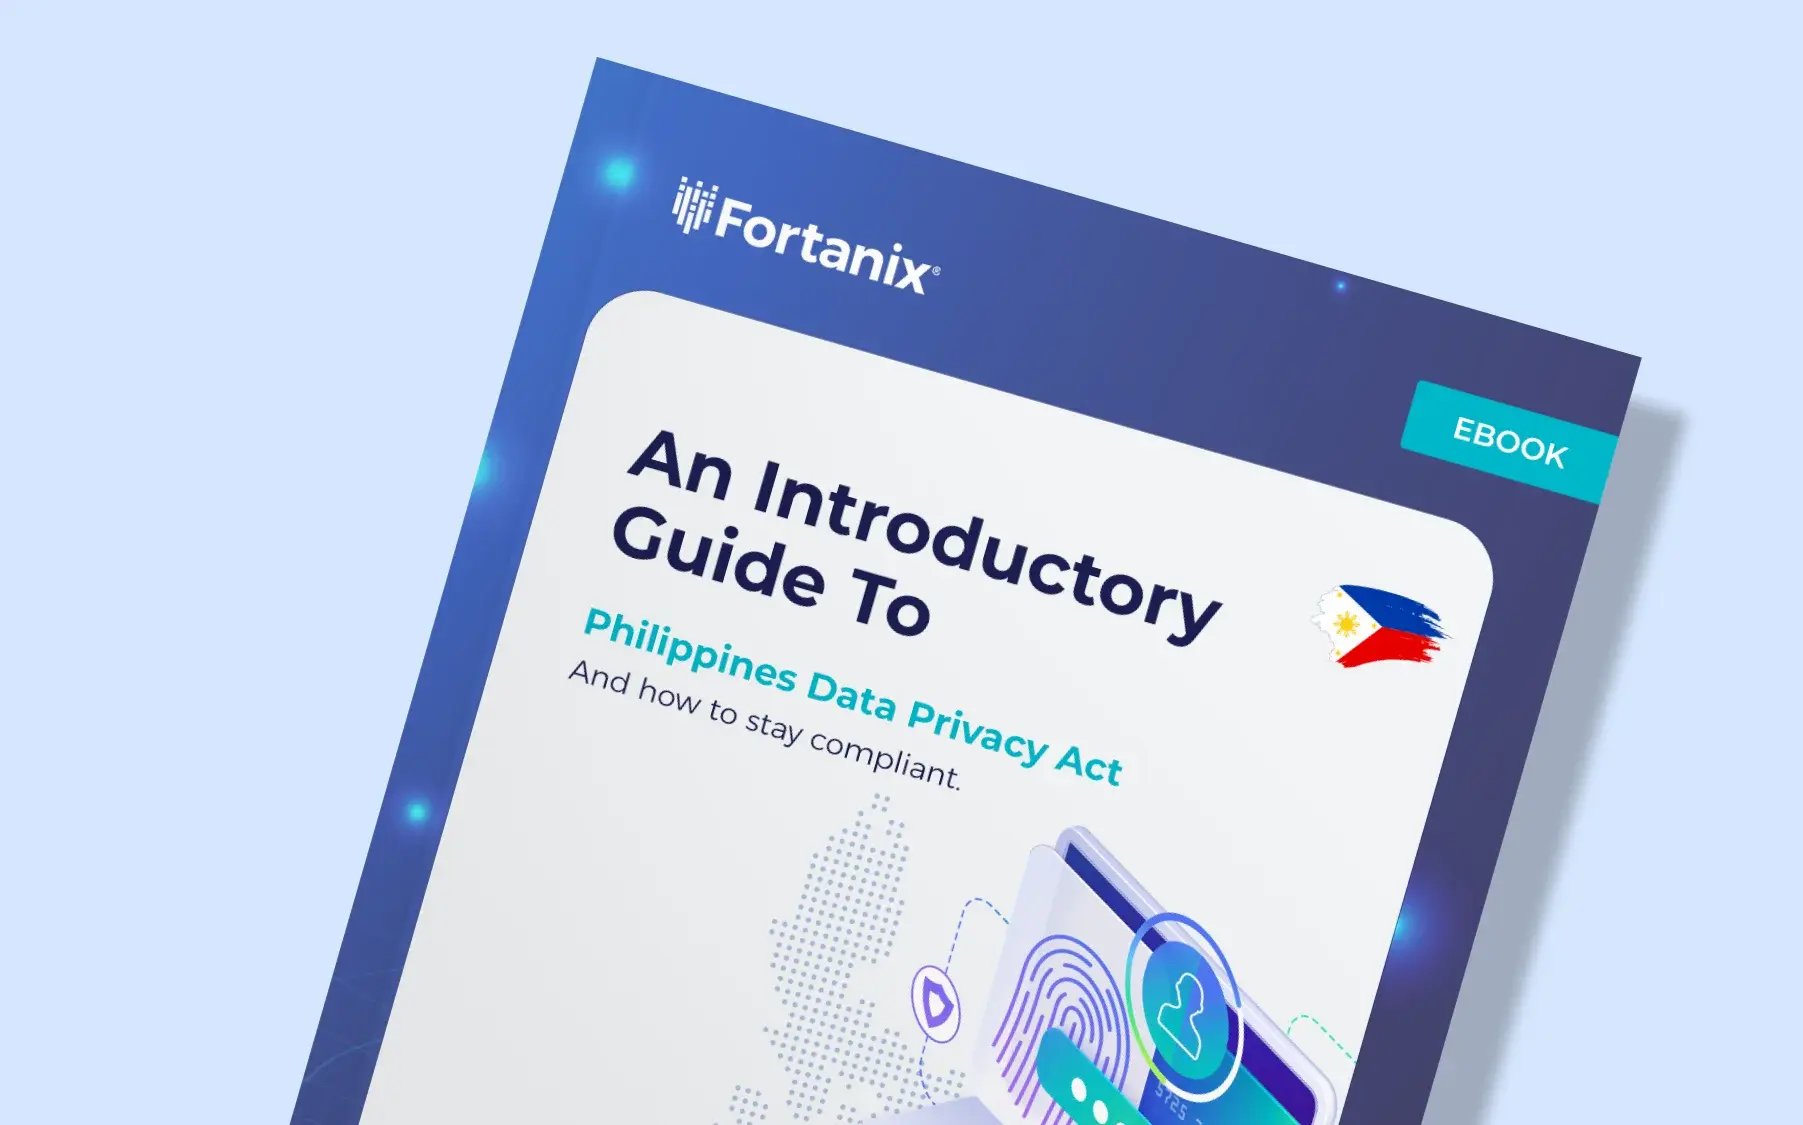 An Introductory Guide To Philippines Data Privacy Act